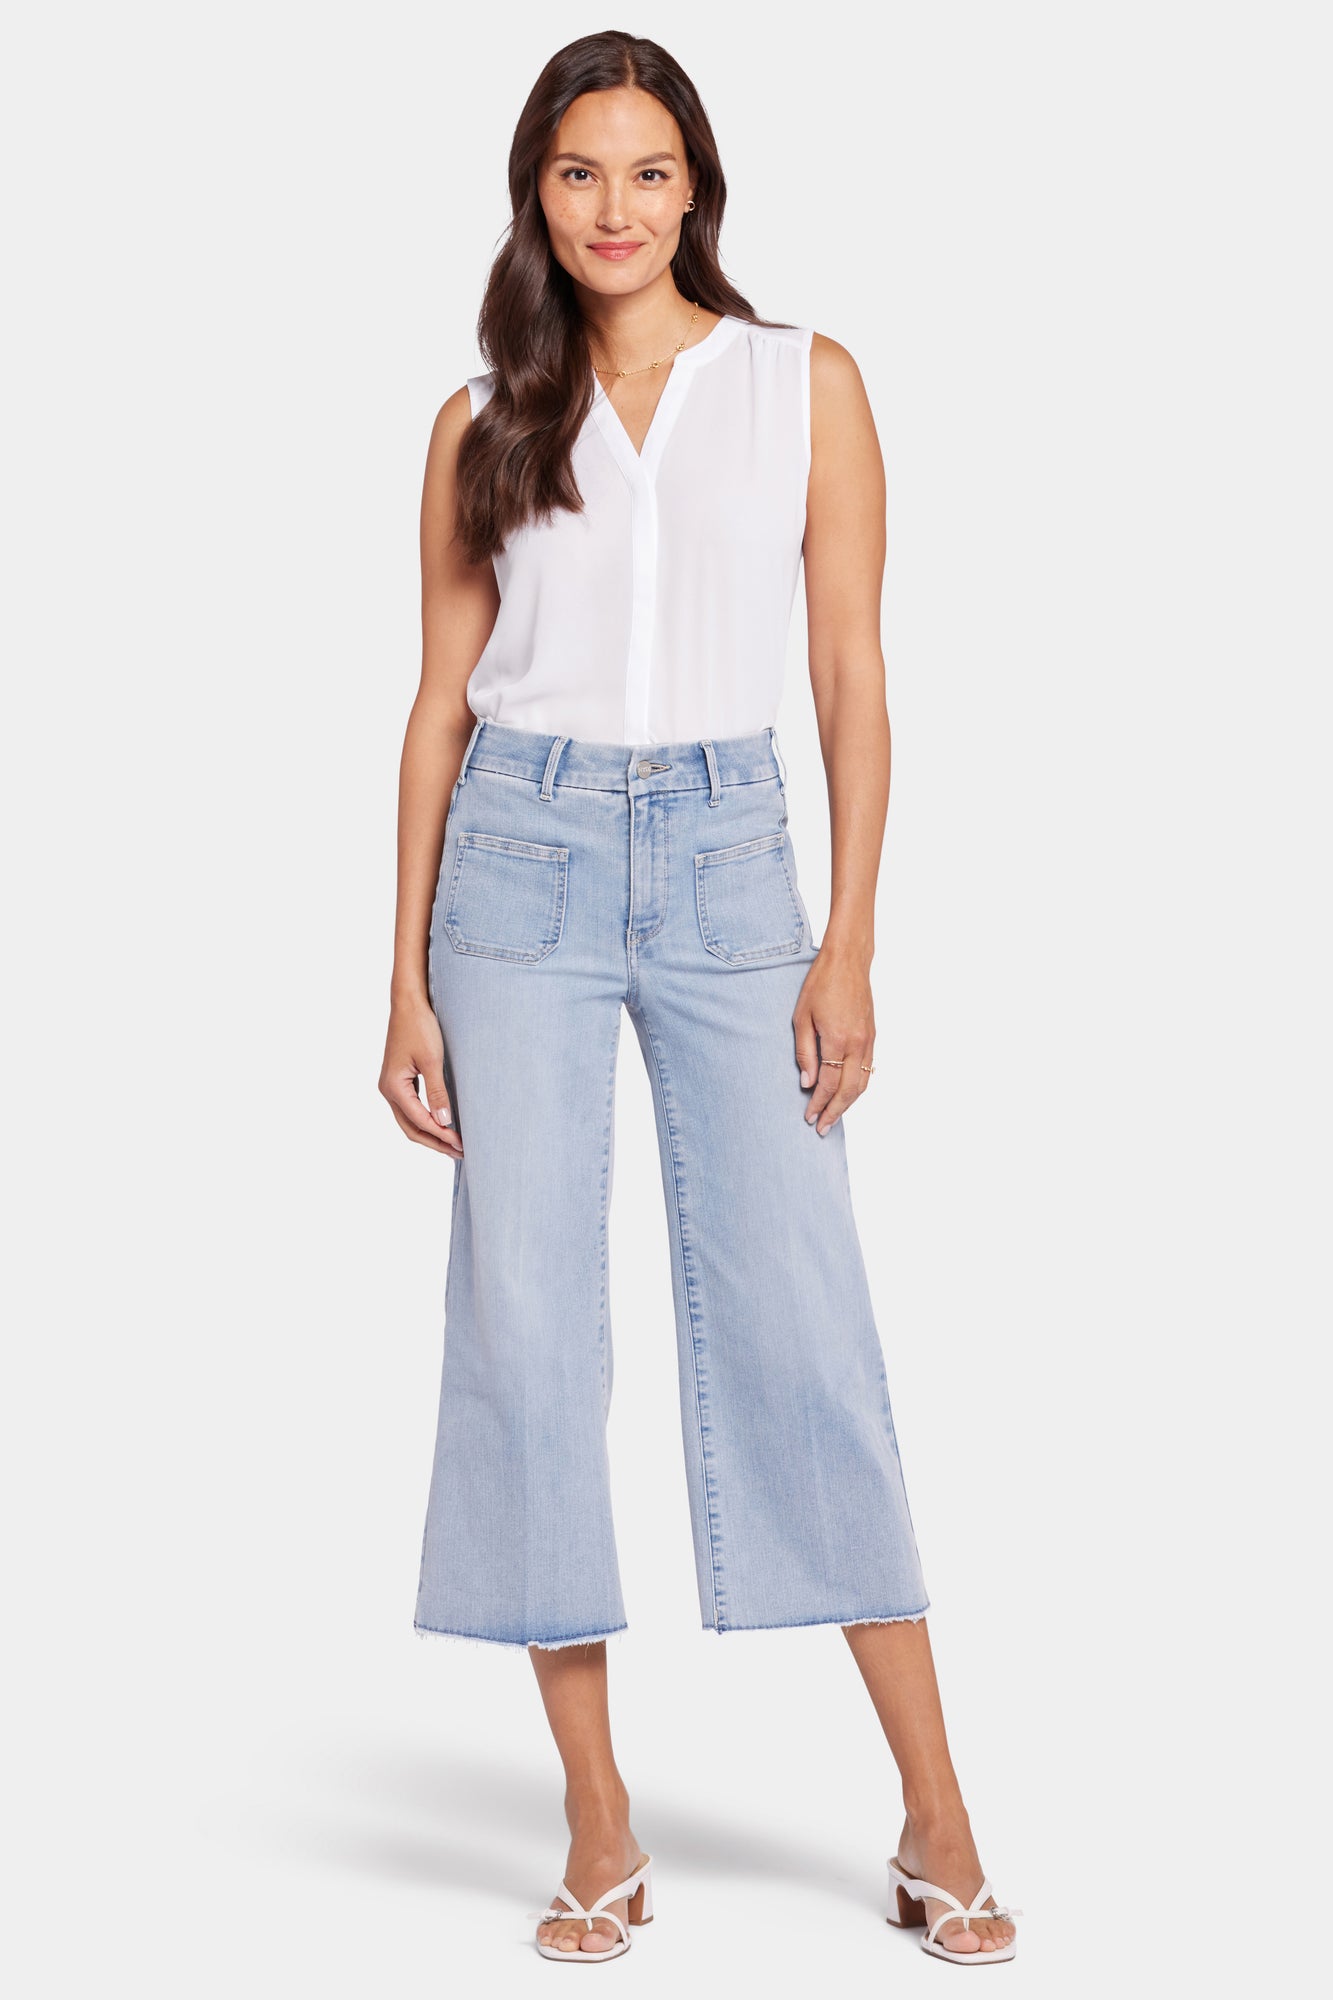 NYDJ Patchie Wide Leg Capri Jeans In Petite With Frayed Hems - Divine